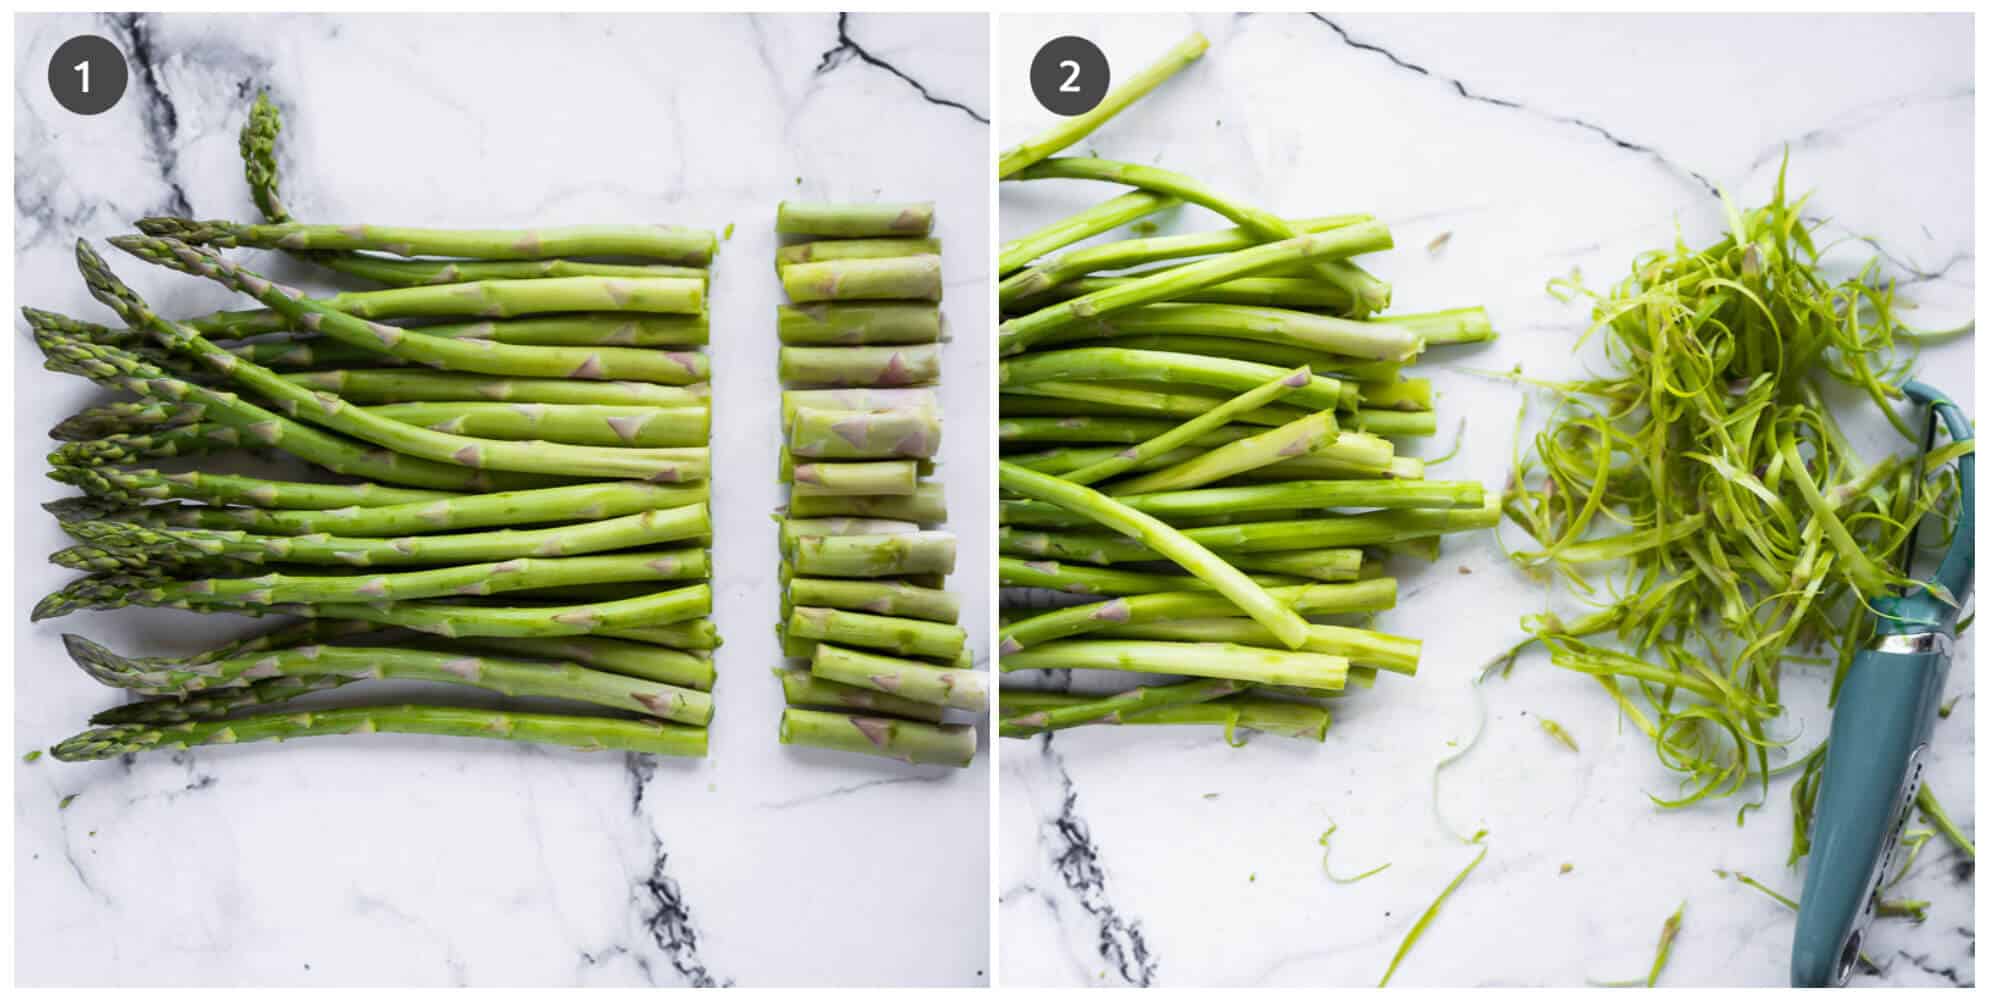 collage of 2 photos showing how to prepare asparagus for cookimg